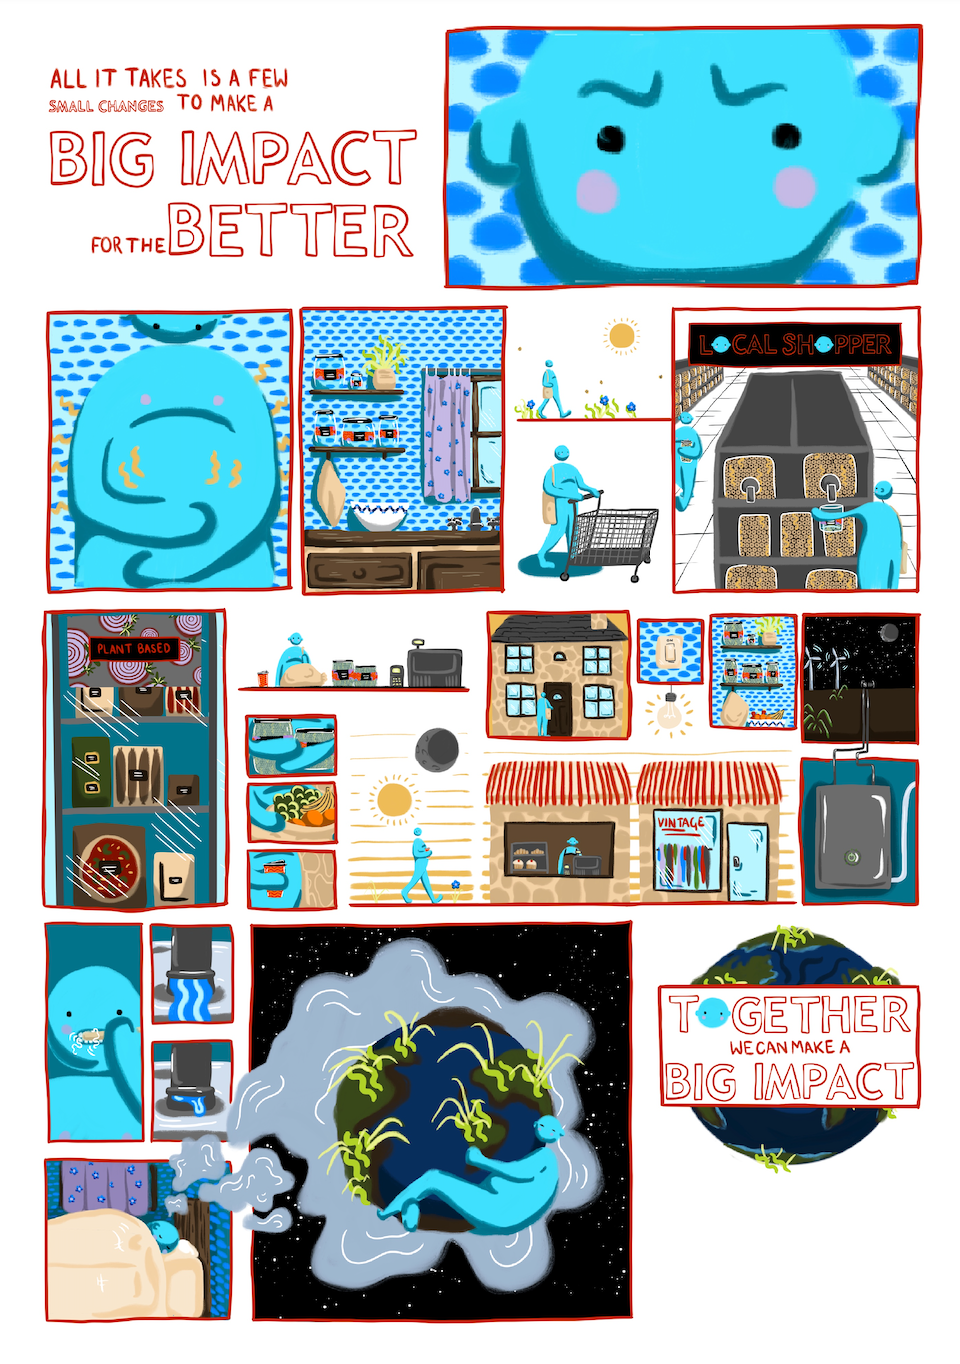 The ways in which we can introduce small practices of sustainability into our lives to establish environmental stability as a society, told through a graphic novel style poster.